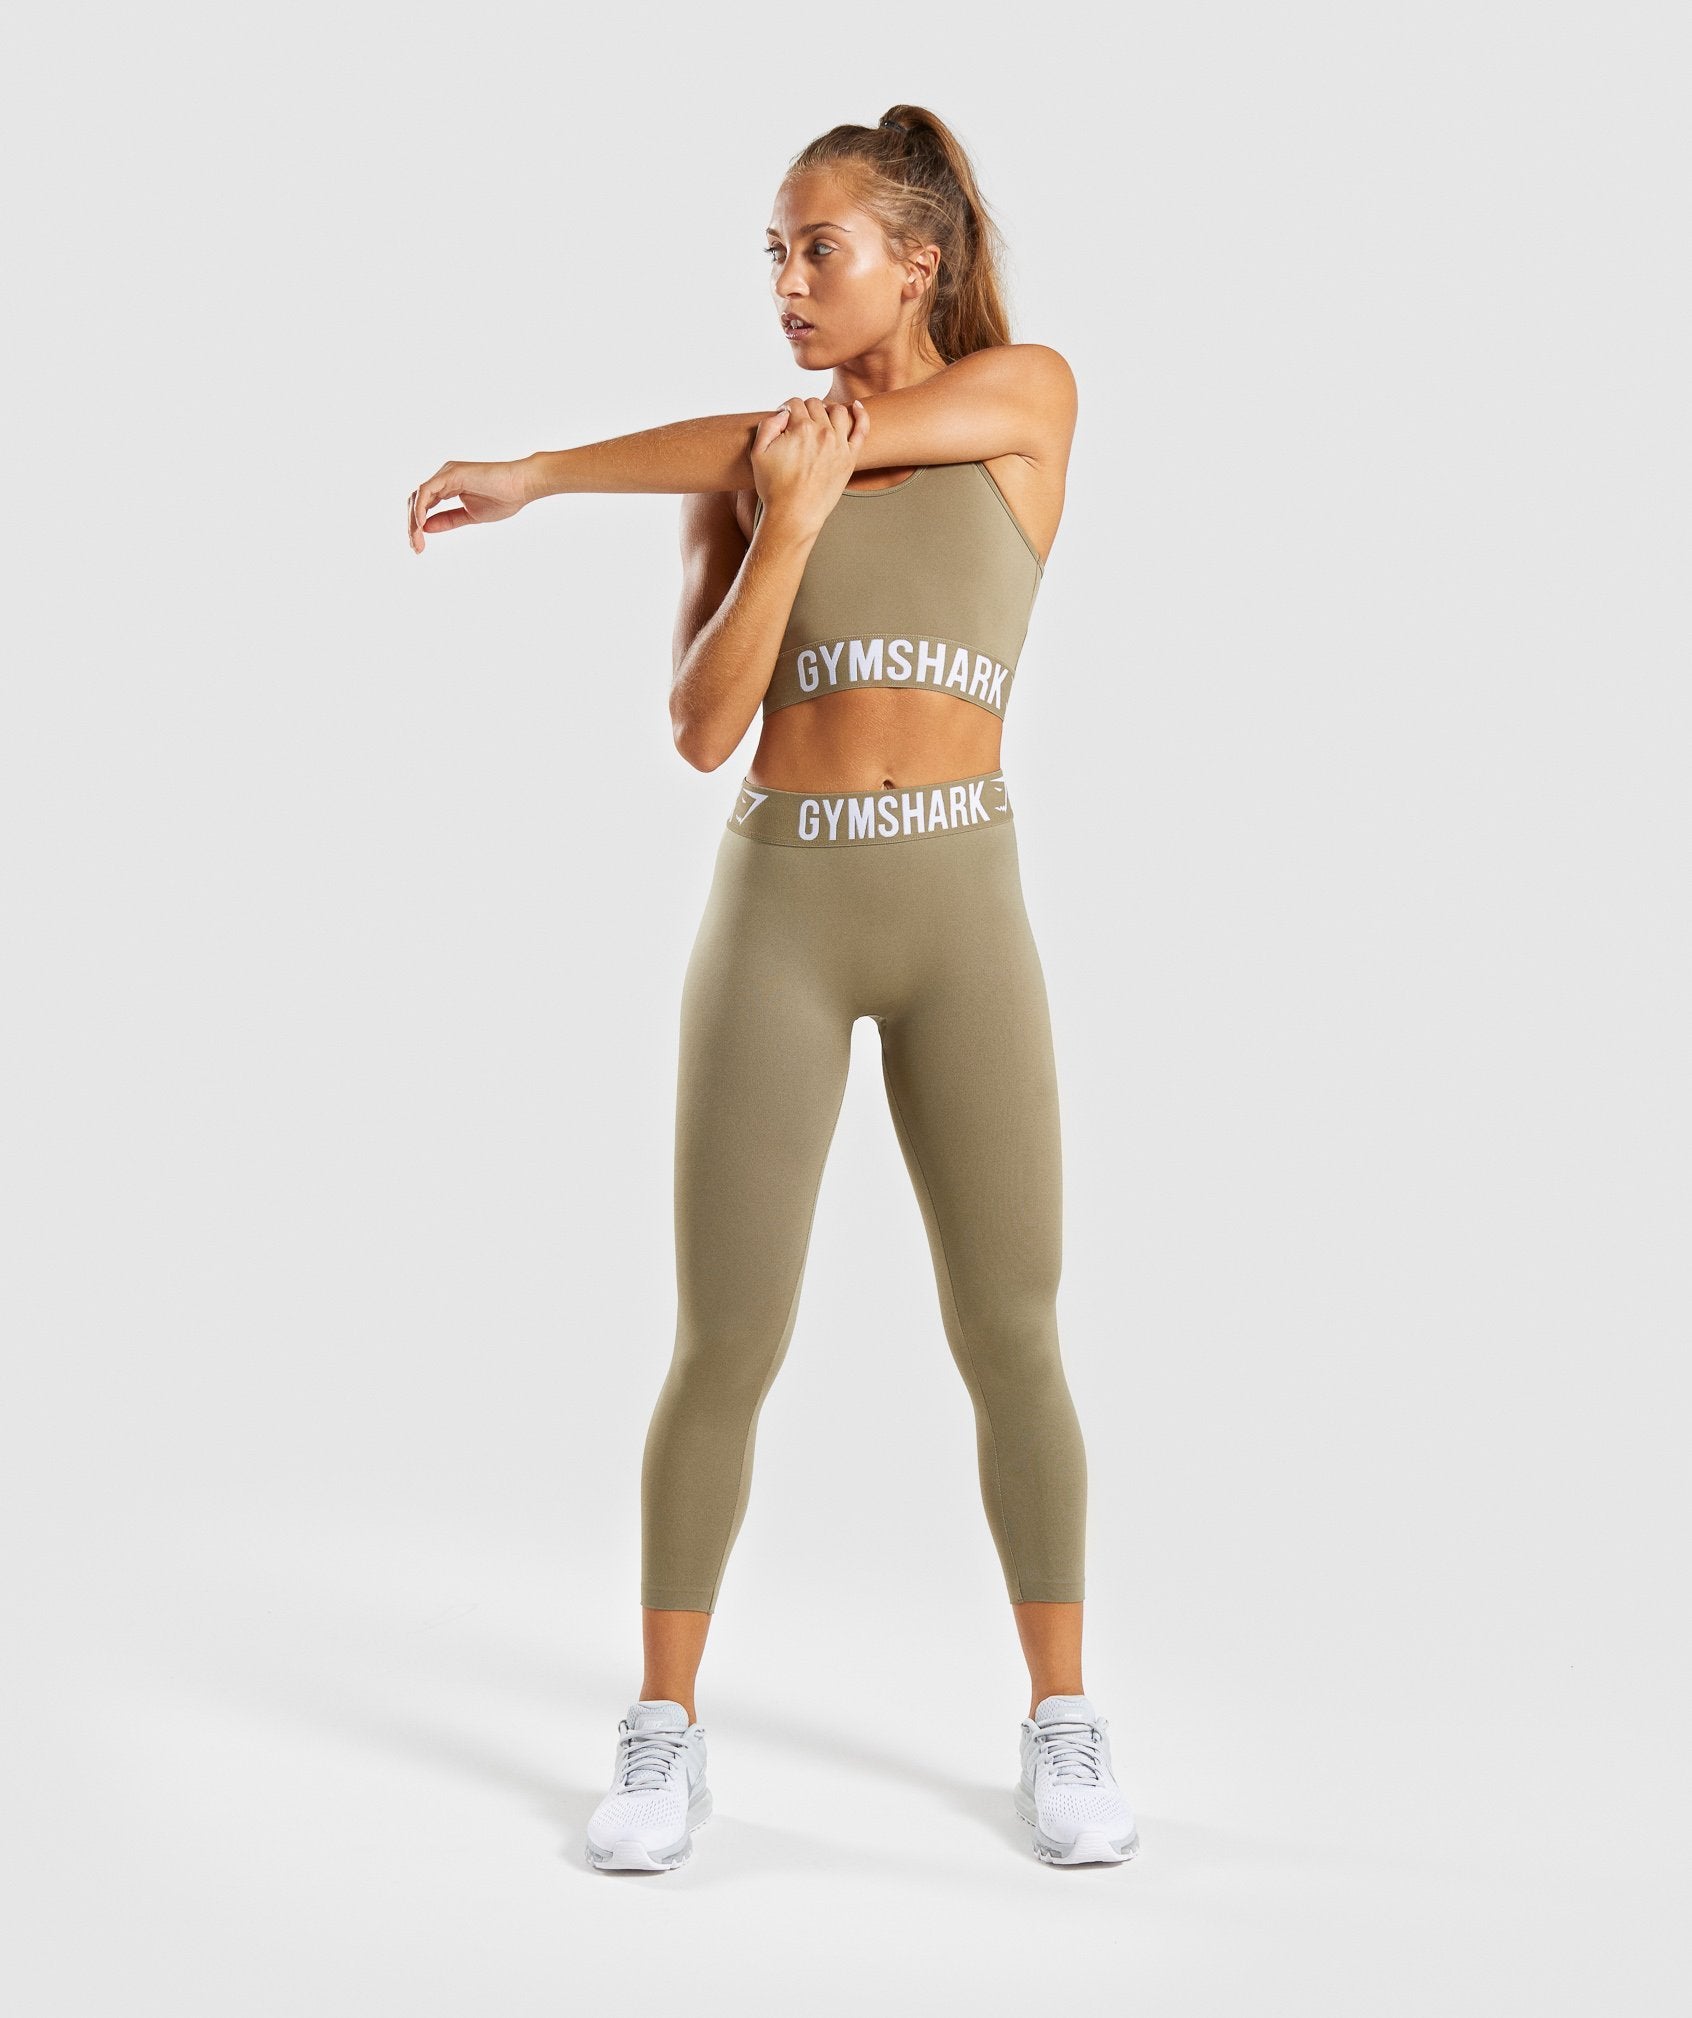 Fit Seamless Cropped Leggings in Washed Khaki/White - view 4